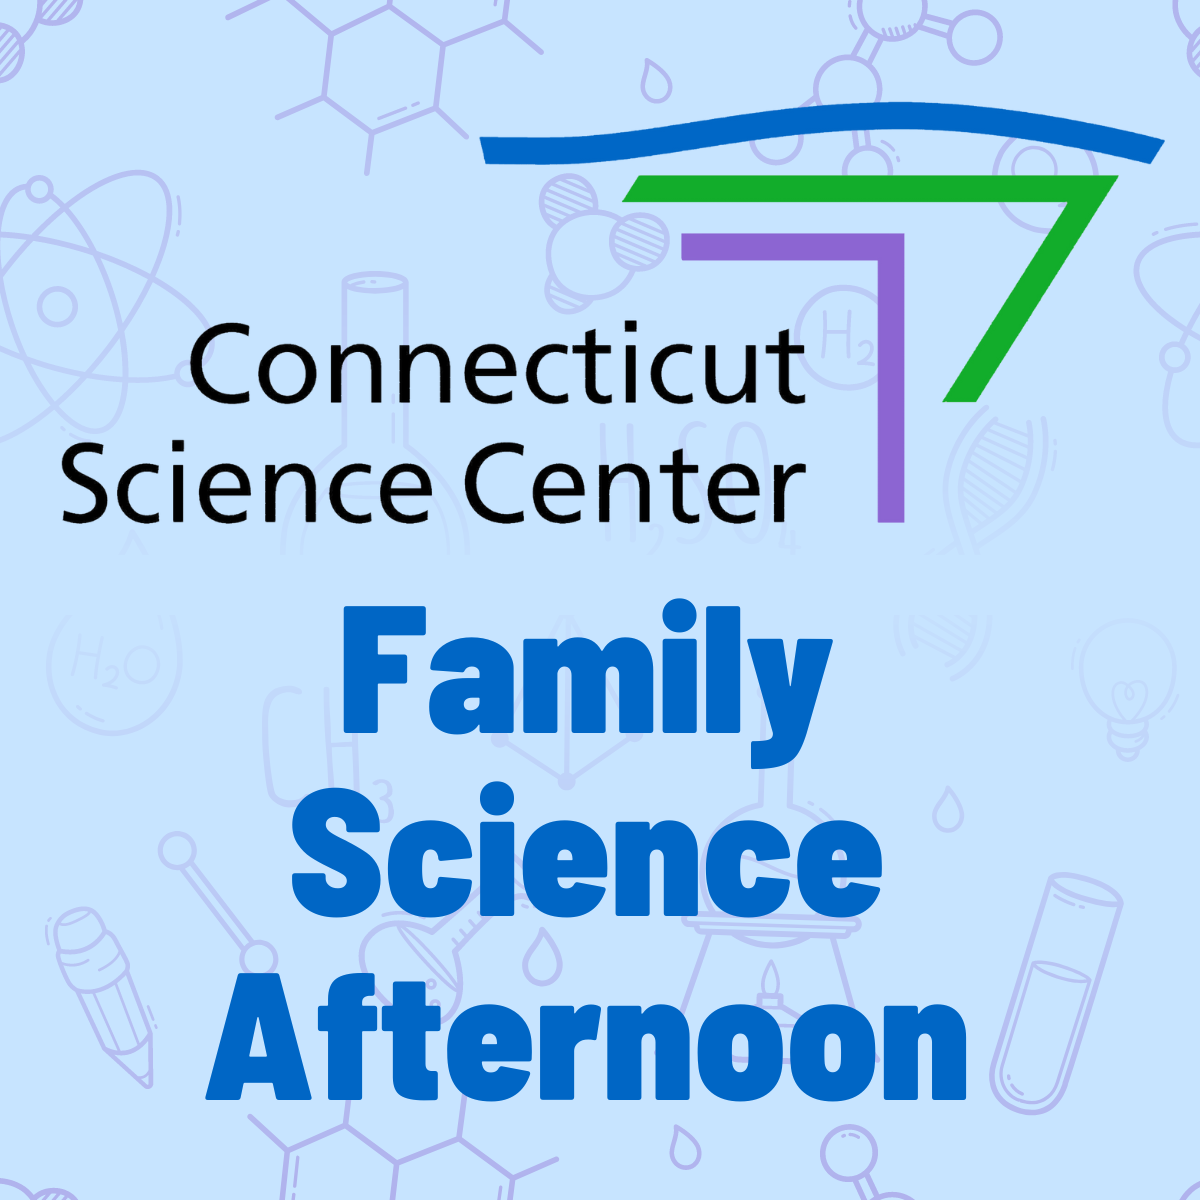 A light blue background with the logo of the CT Science Center (their name in a sans serif font and a pink, green, and blue abstract version of their building) with the text Family Science Afternoon